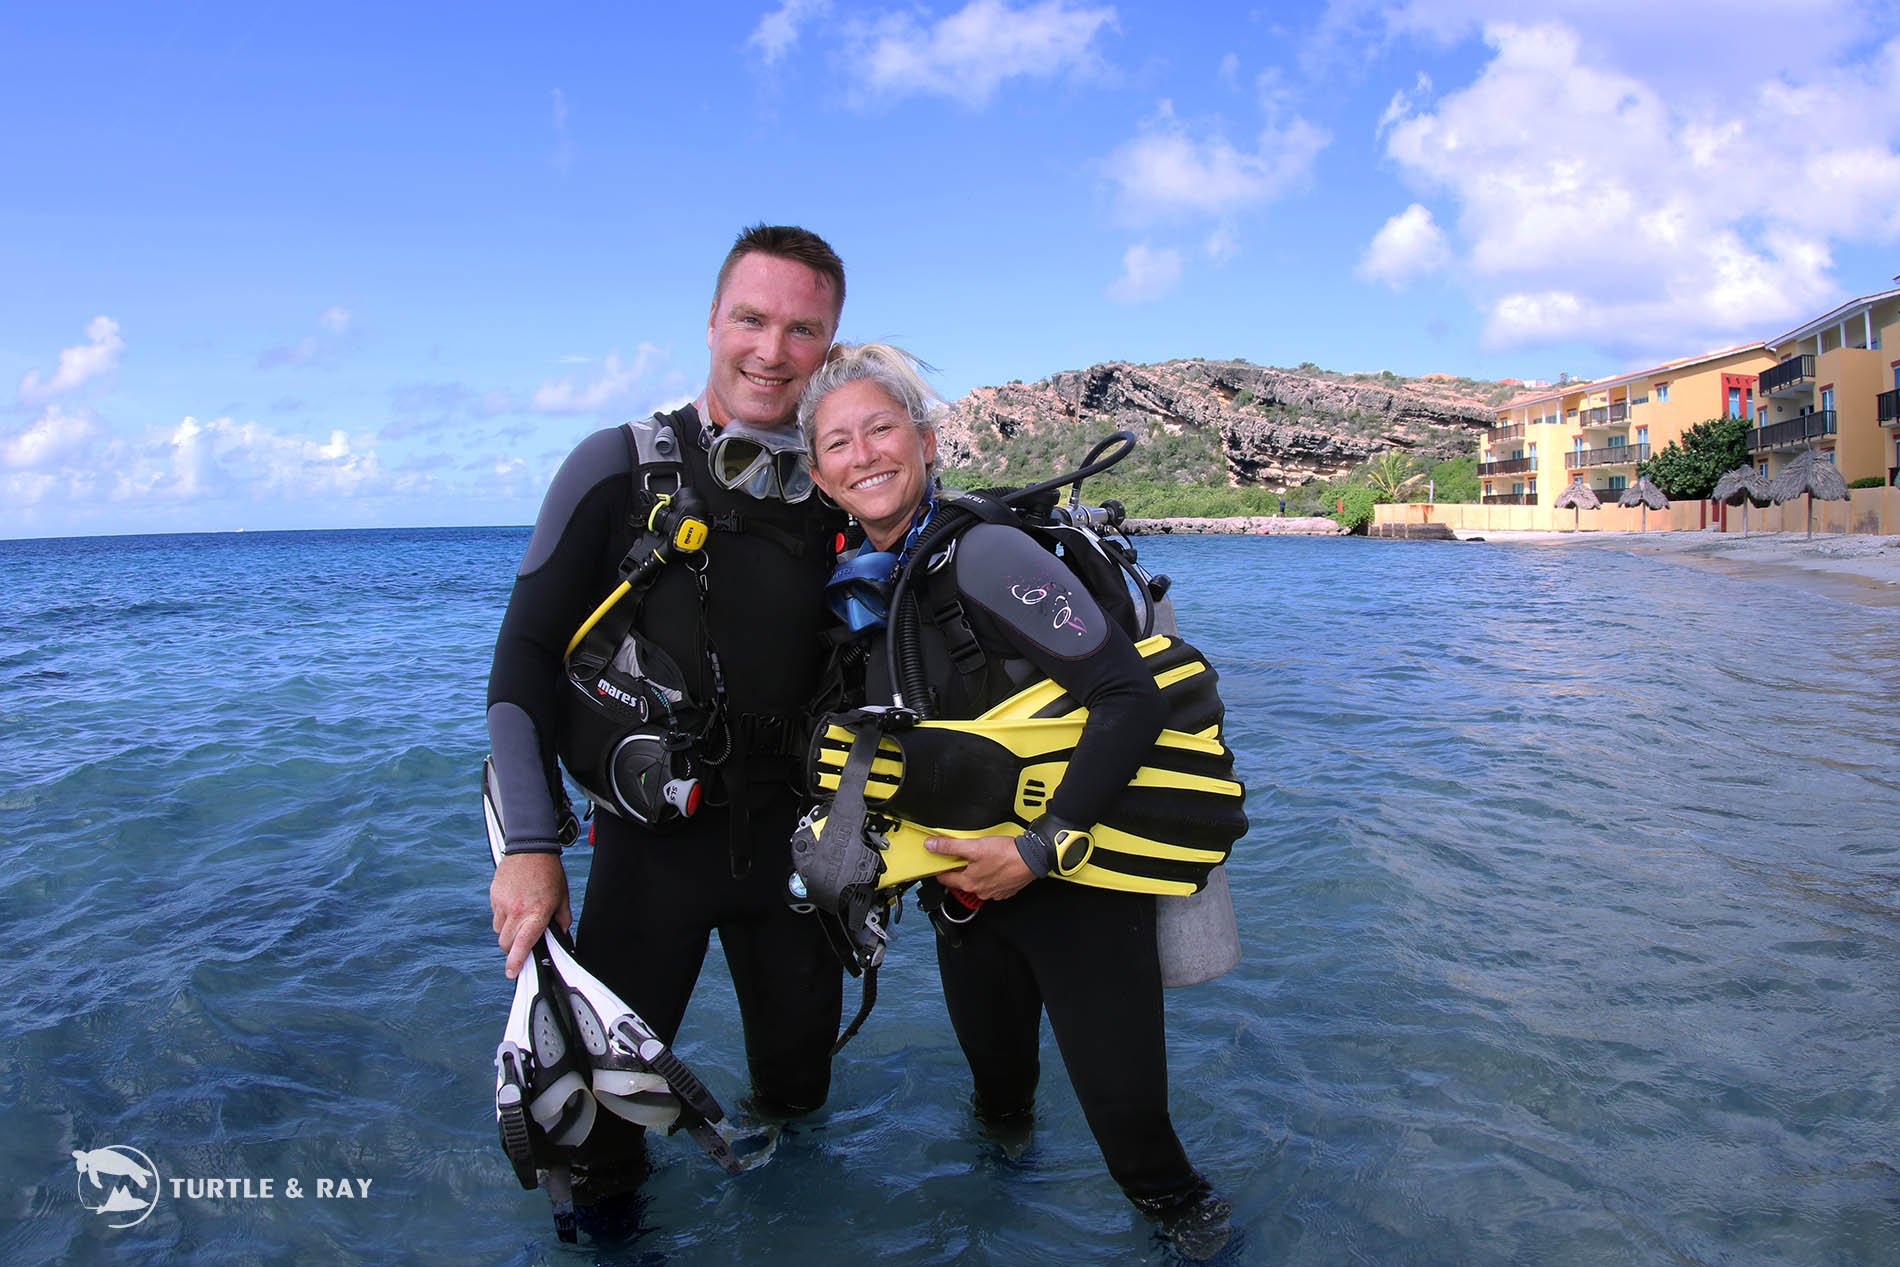 What’s the Difference Between Scuba Diver and Open Water Diver?